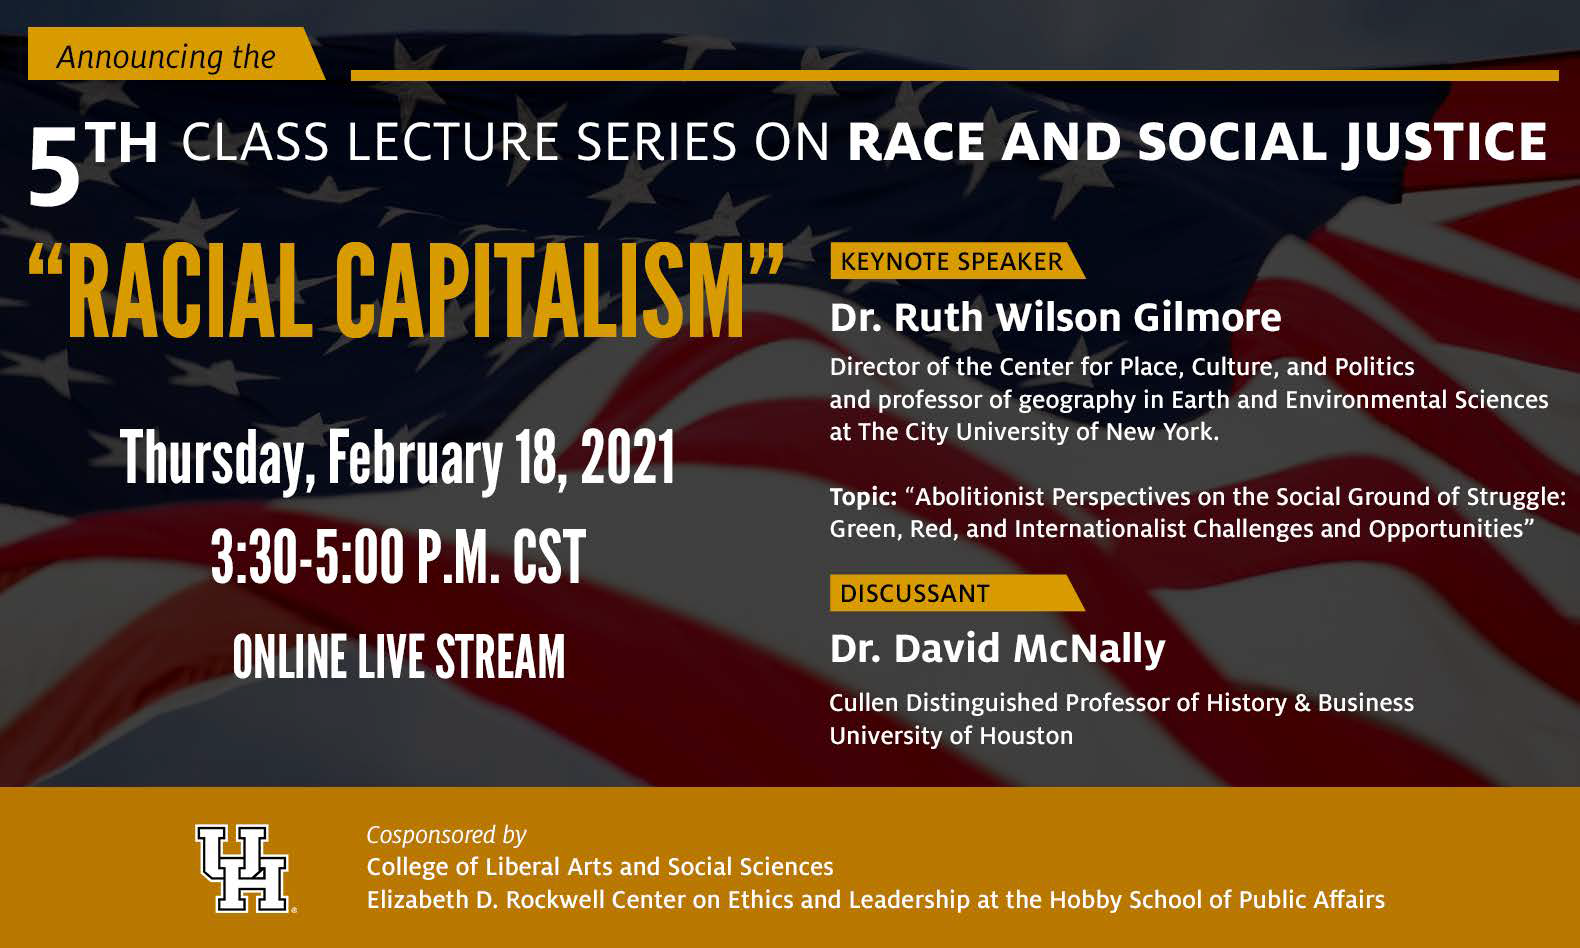 Event flyer of racial capitalism talk with keynote speaker Dr. Ruth Wilson Gilmore